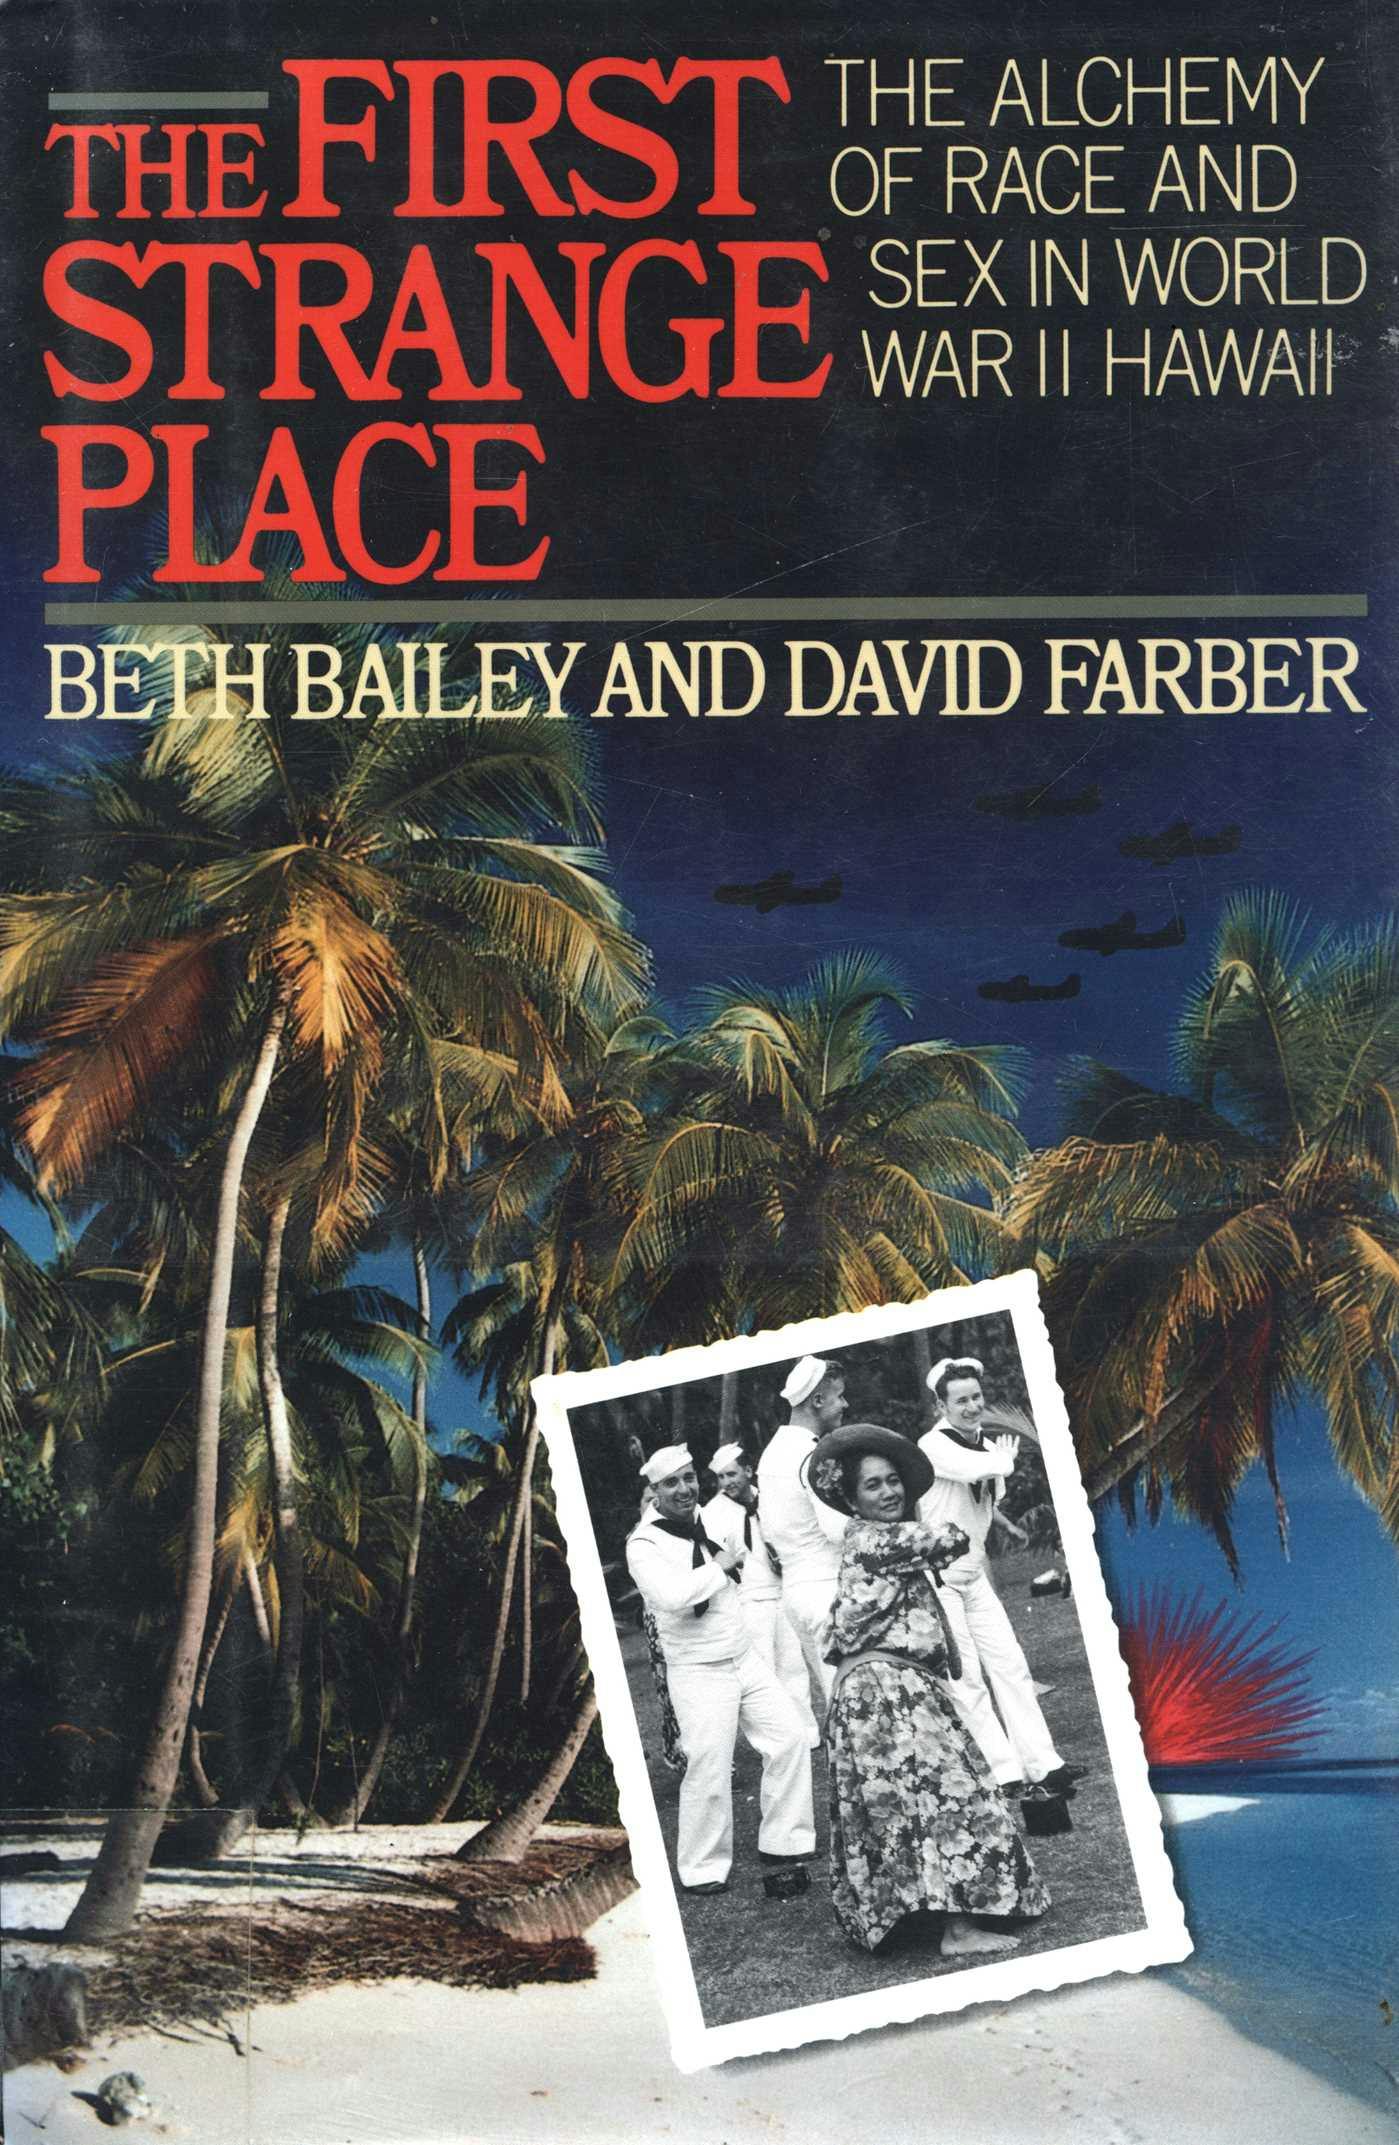 The First Strange Place: The Alchemy of Race and Sex in World War II Hawaii - Beth Bailey, David Farber